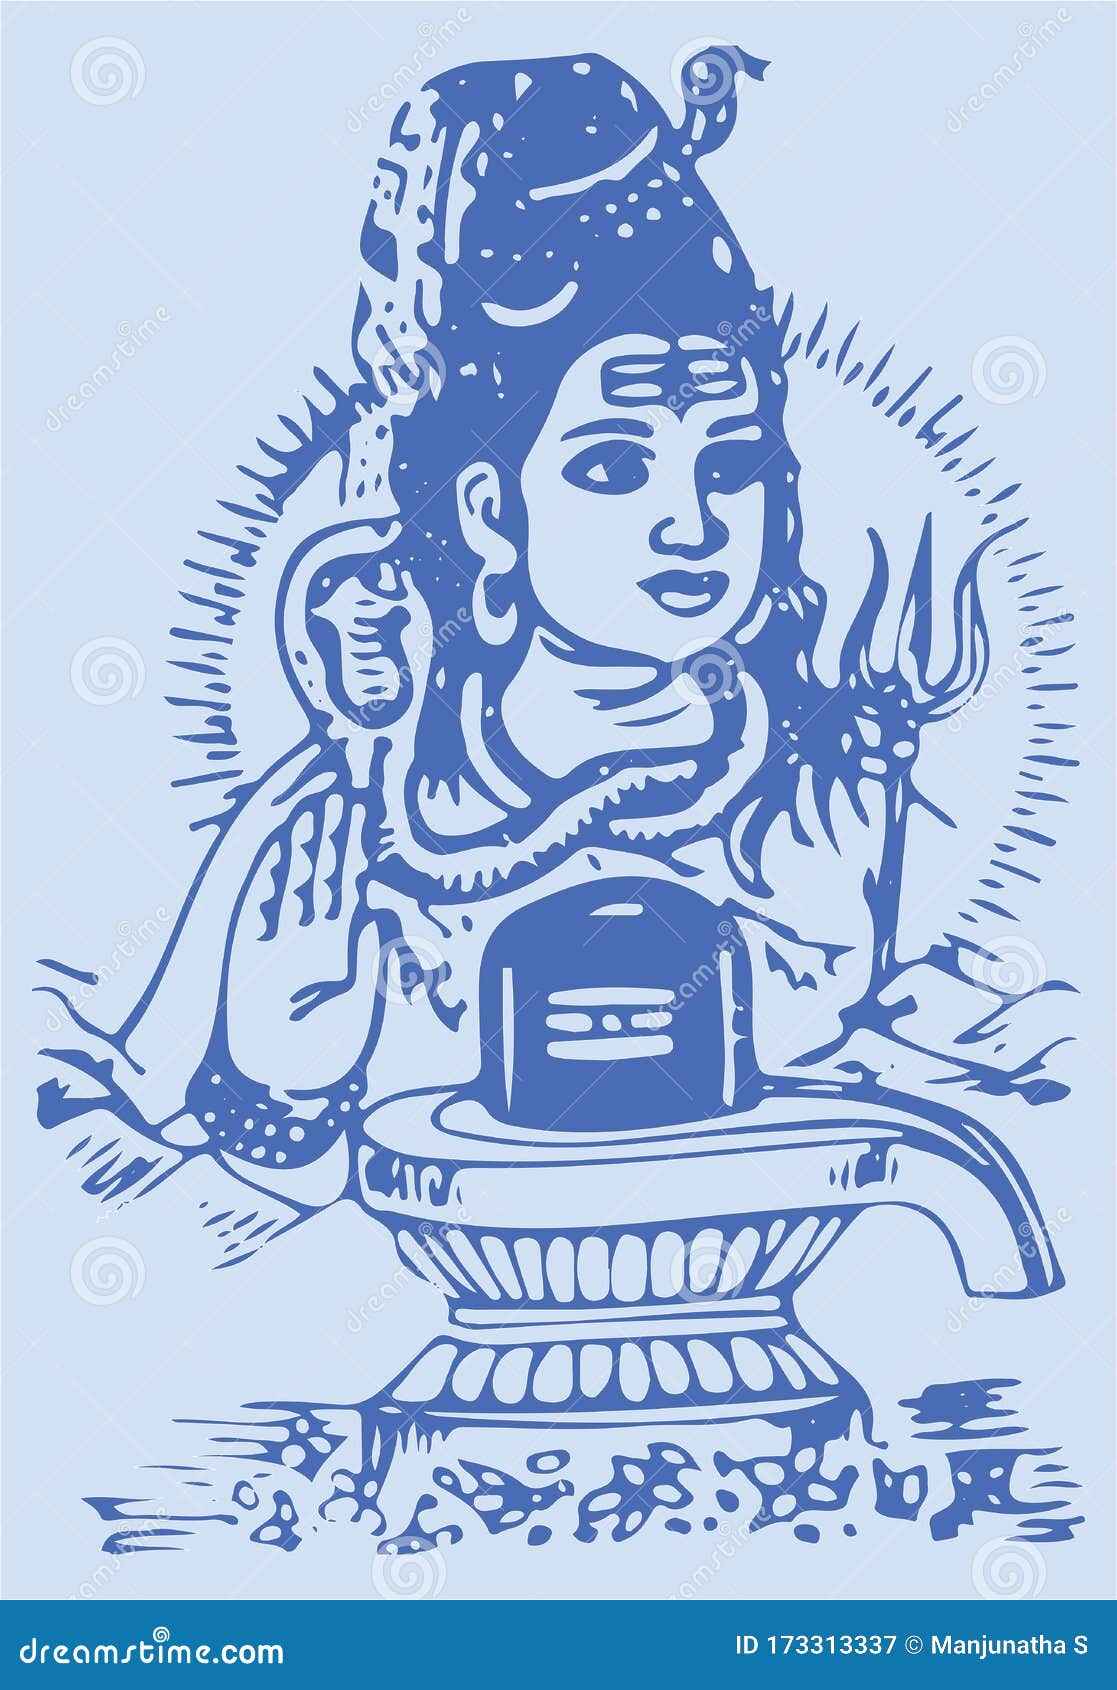 Drawing or Sketch of Lord Shiva and in Front Shivlinga. Shivratri ...